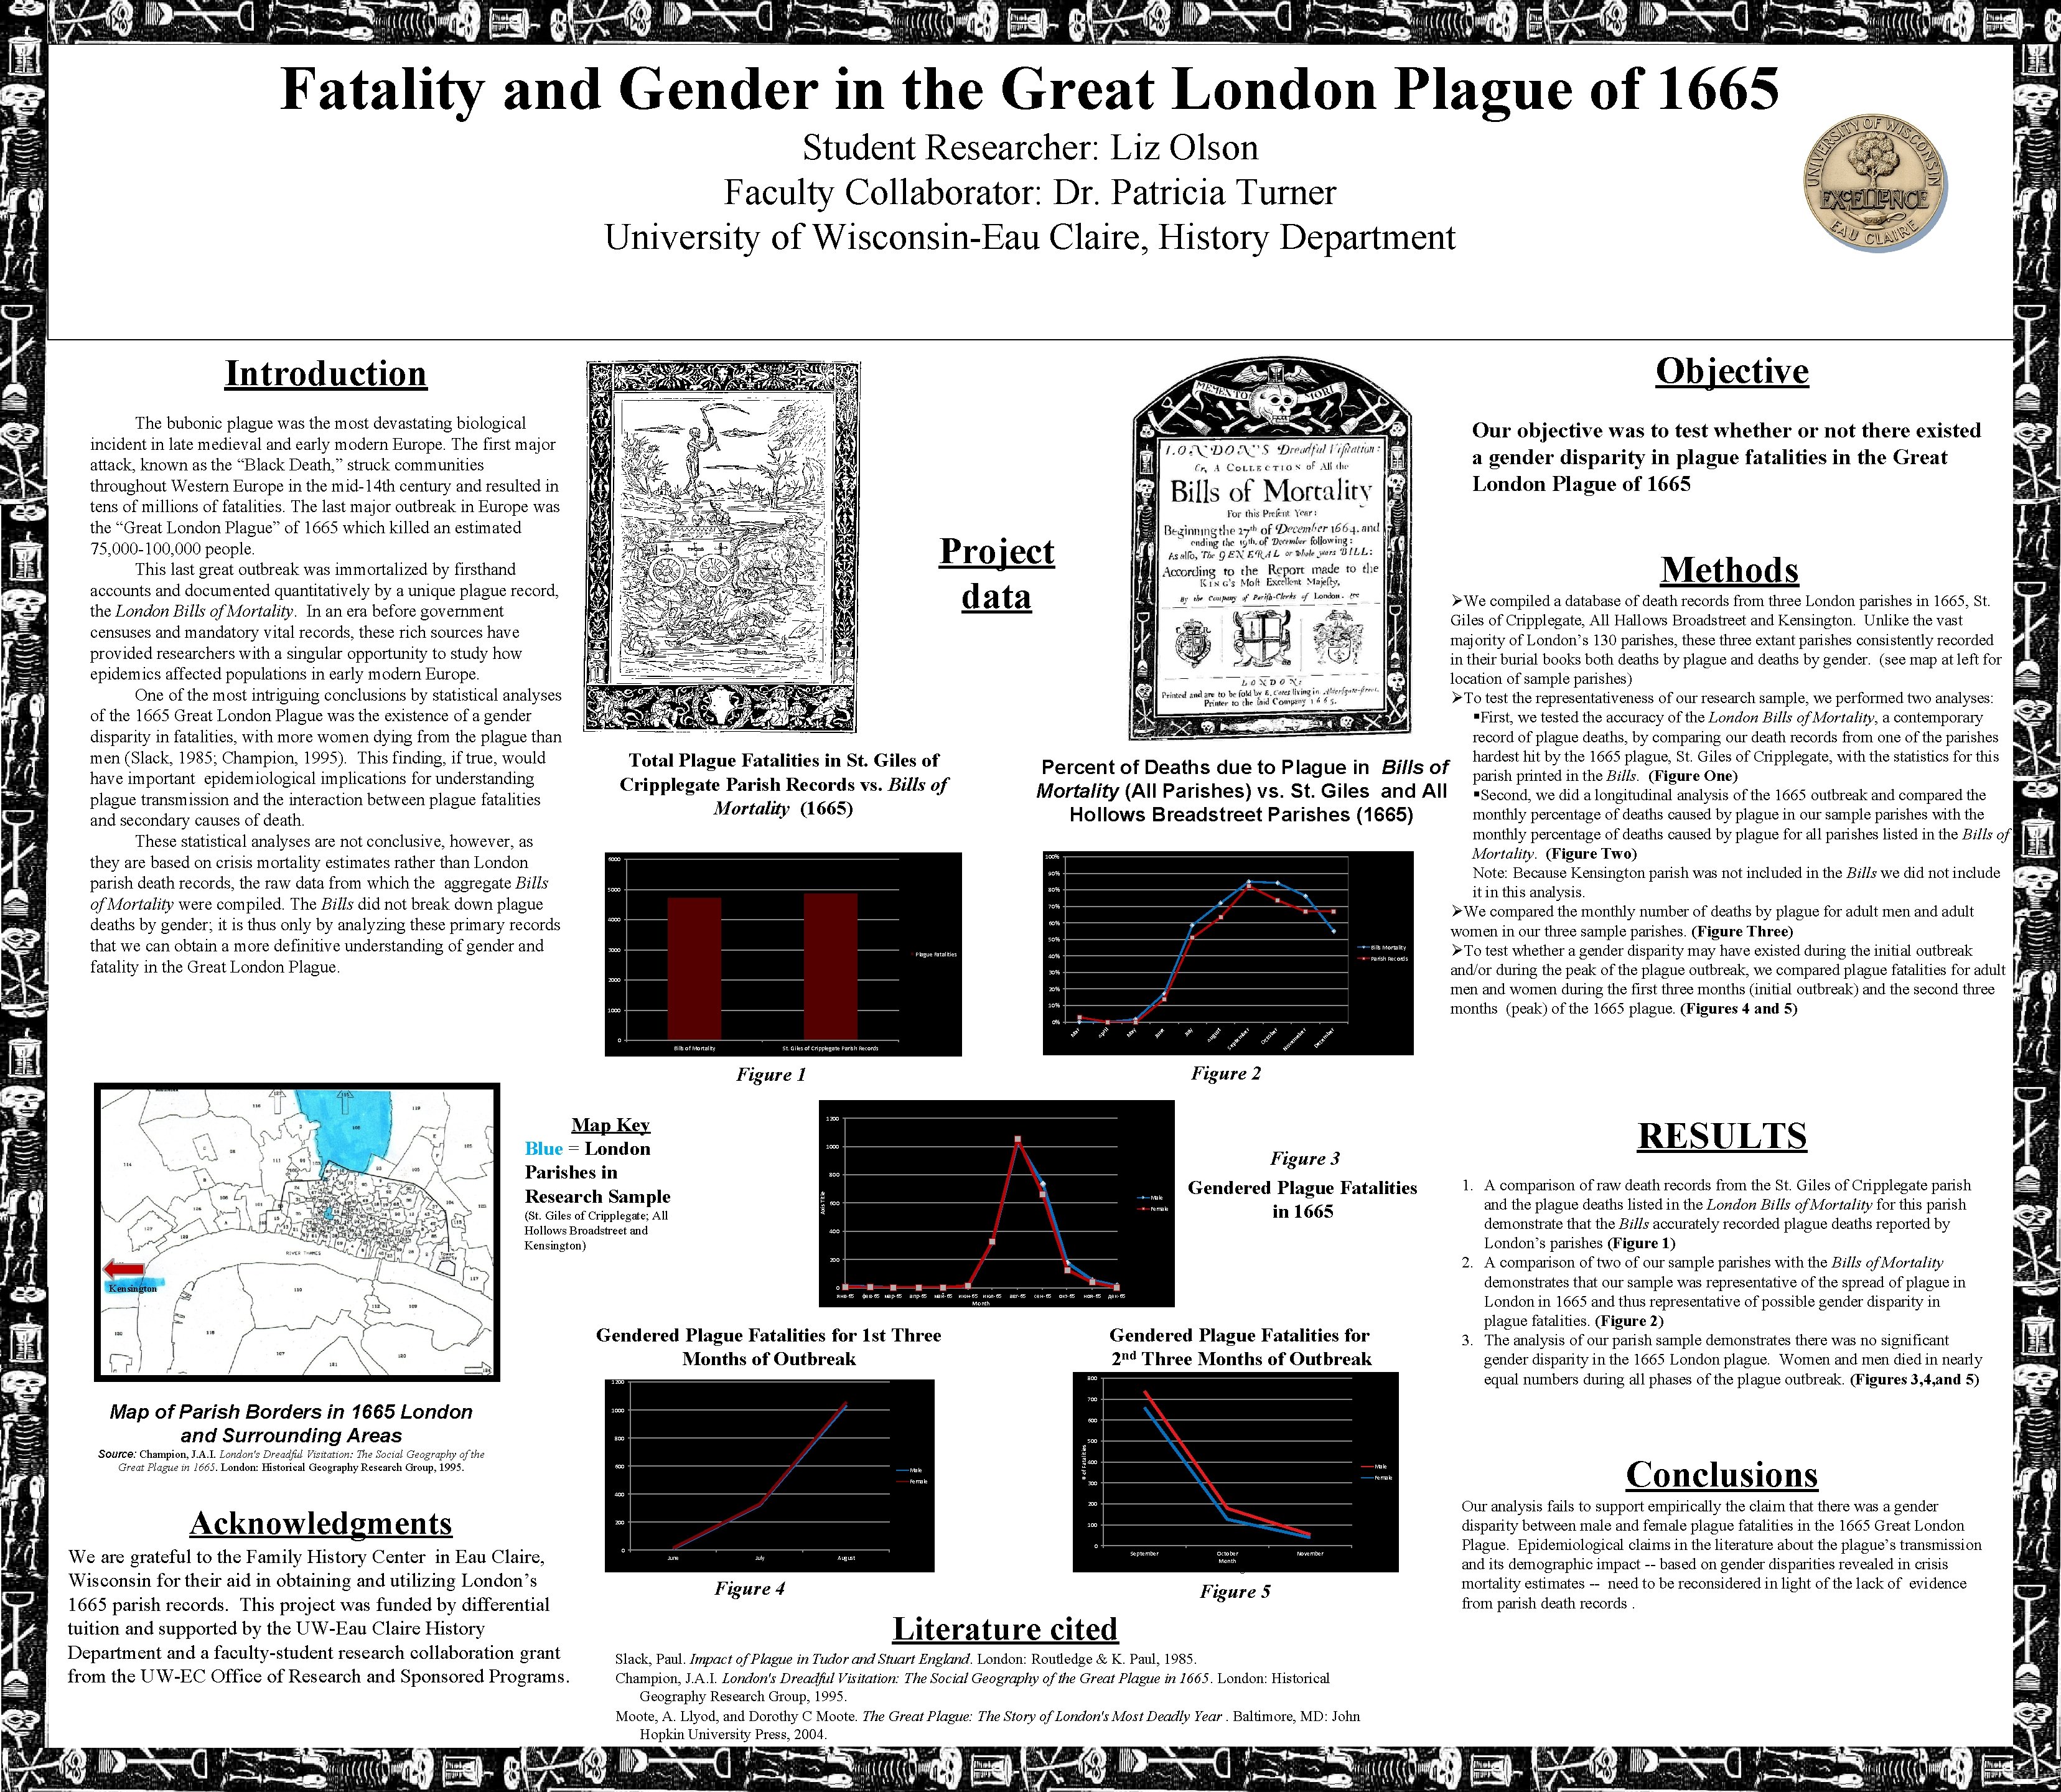 Fatality and Gender in the Great London Plague of 1665 Student Researcher: Liz Olson